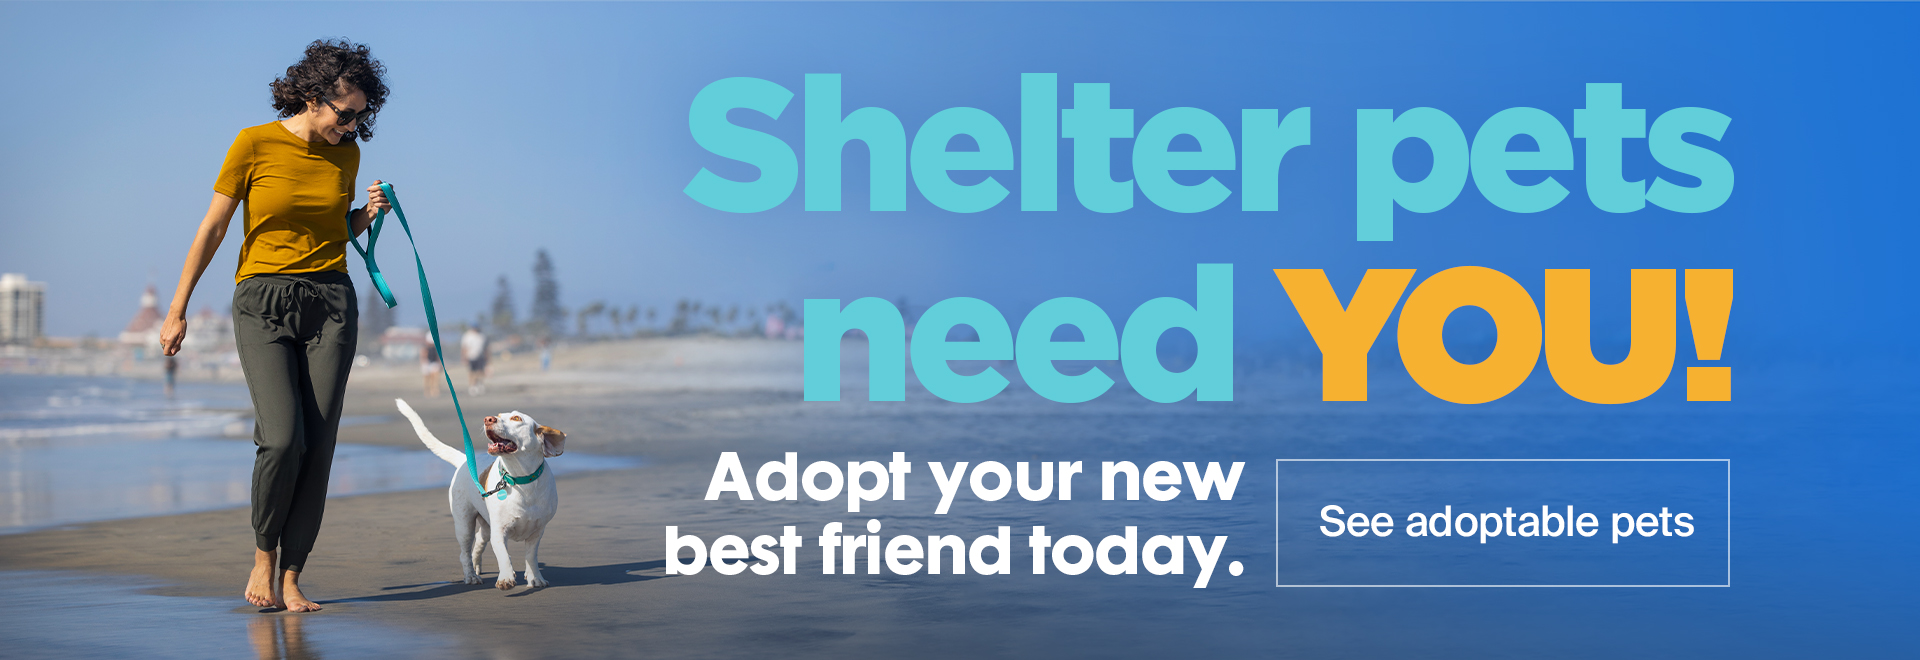 Shelter pets need YOU! Adopt you new best friend today. See adoptable pets